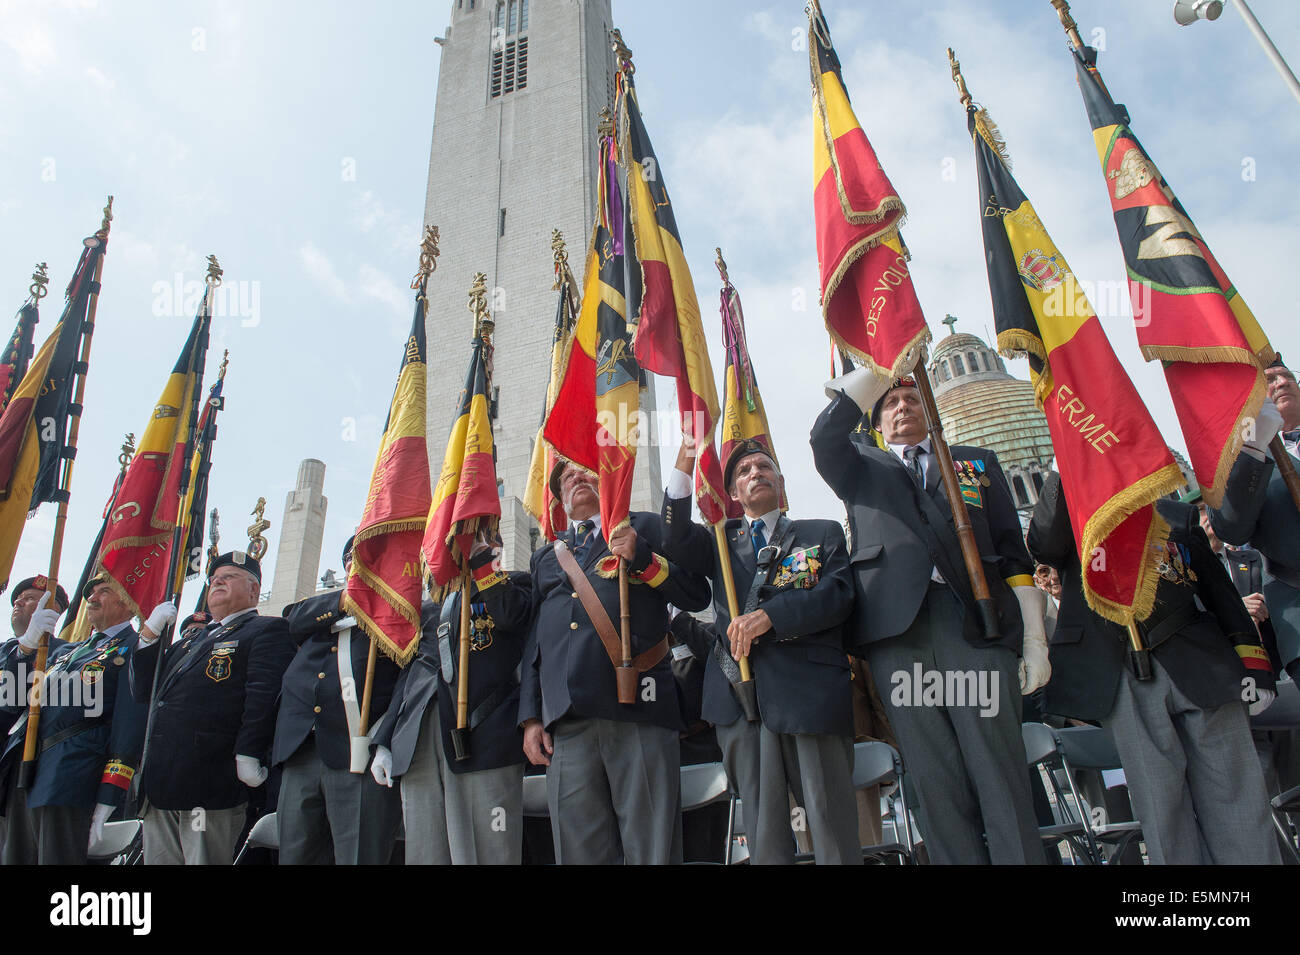 Liege, Belgium. 04th Aug, 2014. Belgian veterans take part in the international memorial ceremony for the 100th anniversary of the beginning of the First World War in Liege, Belgium, 04 August 2014. The year 2014 sees the 100th anniversary of the beginning of WWI, or the Great War, which according to official statistics cost more than 37 million military and civilian casualties between 1914 and 1918. Photo: Maurizio Gambarini/dpa/Alamy Live News Stock Photo